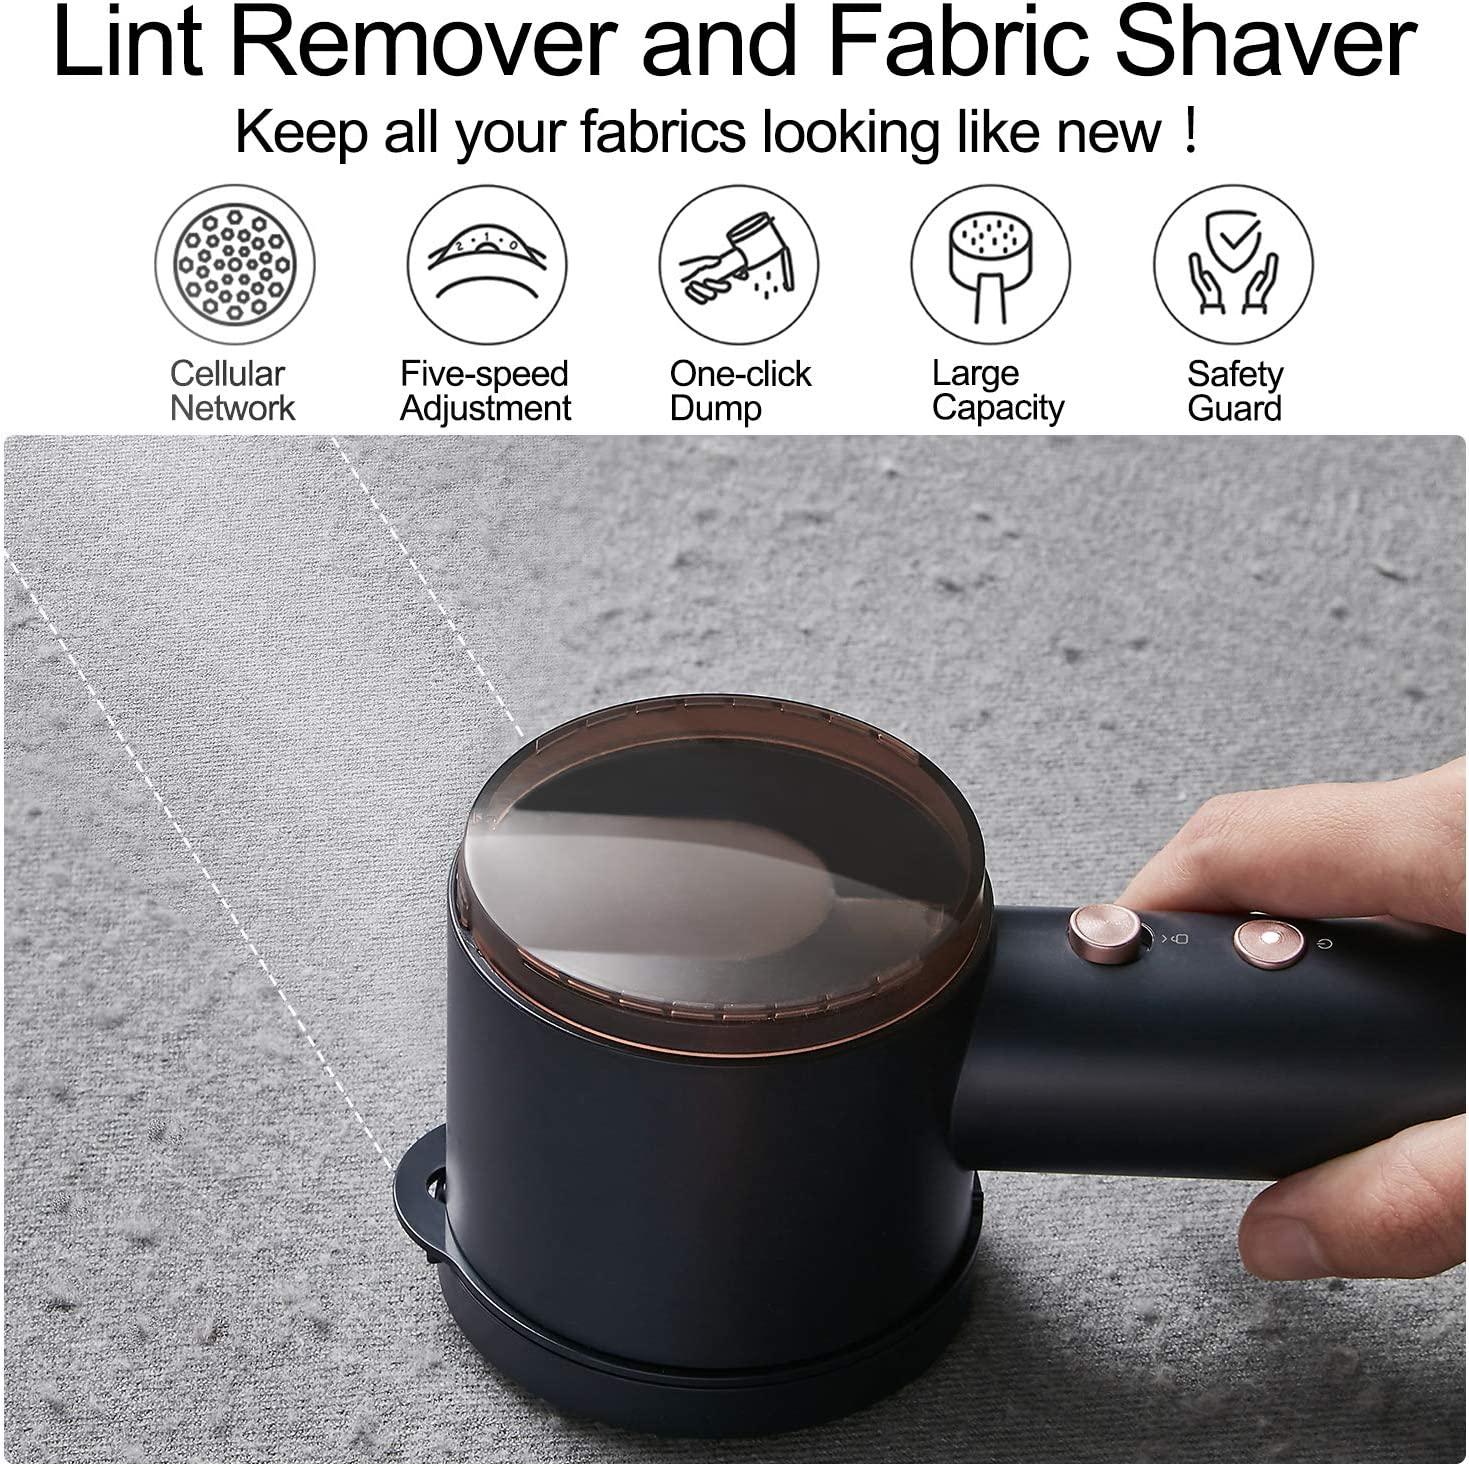 Fabric Shaver Rechargeable Lint Remover, Electric Lint Shaver with 5 Gear  Adjustment Button, Sweater Shaver Removing Fleece Fuzz, Lint, Pills,  Bobbles for Your Clothes, Furniture, Bedding-Gold